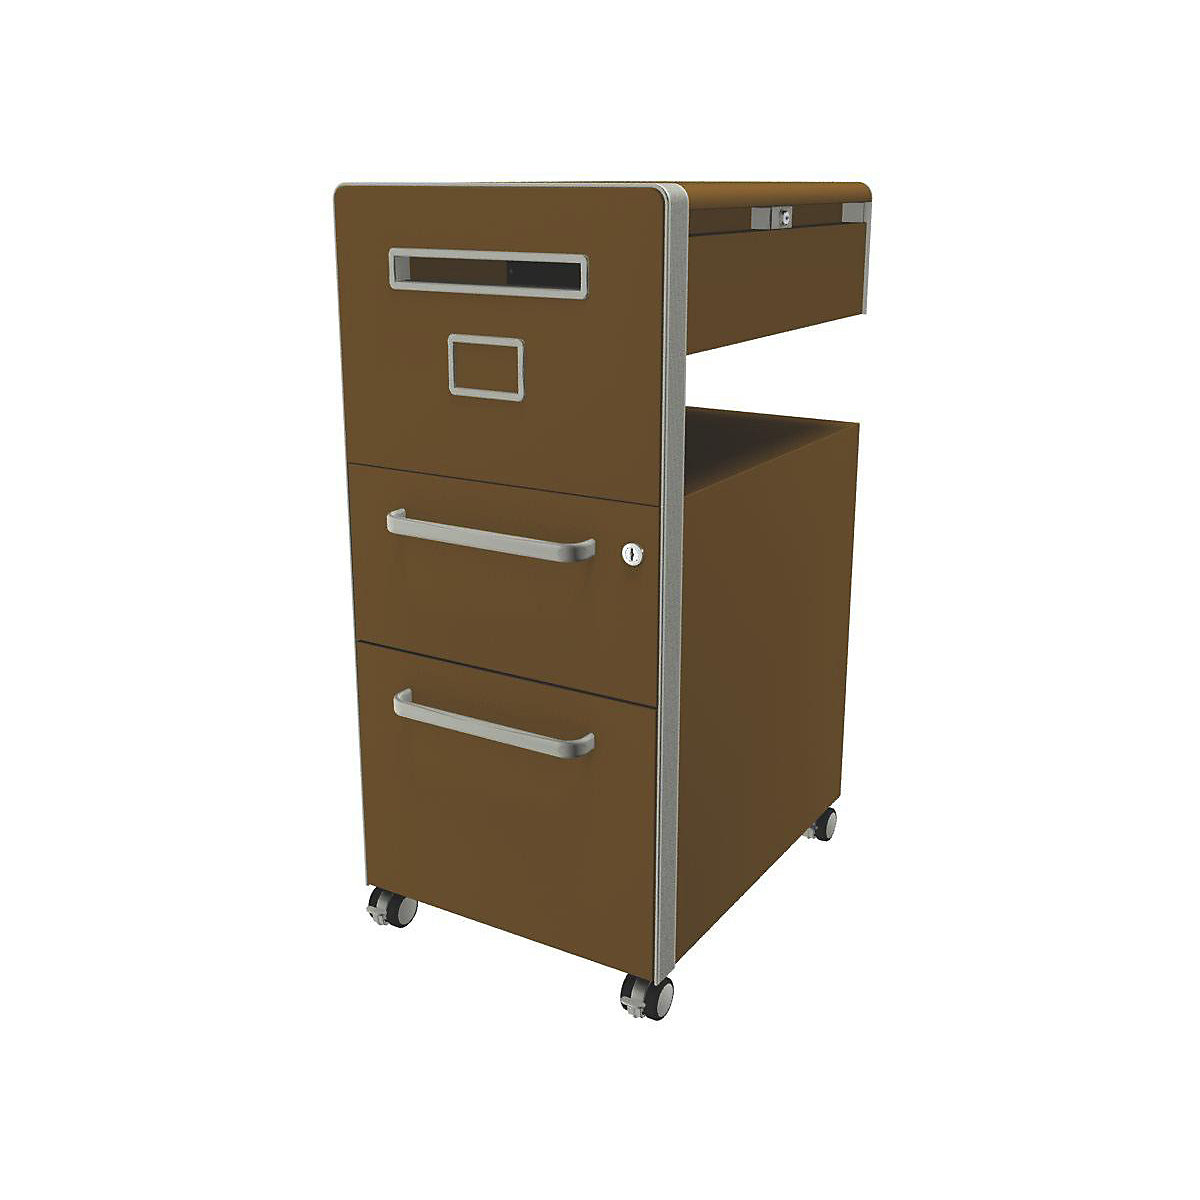 Bite™ pedestal furniture, with 1 pin board, opens on the left side – BISLEY, with 1 universal drawer, 1 suspension file drawer, dijon-18